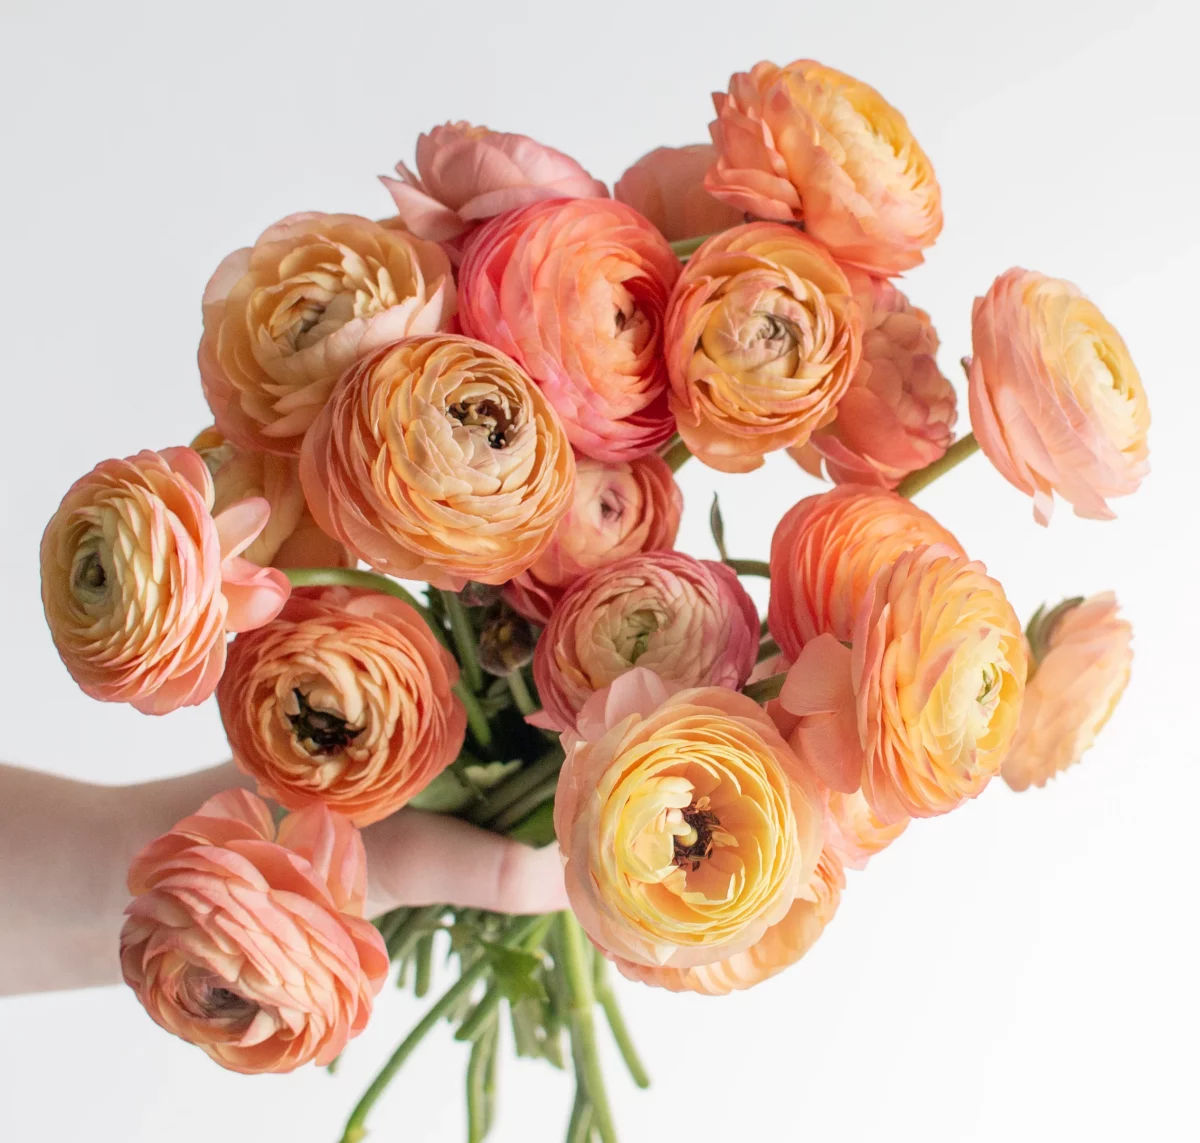 The Ultimate Guide To Growing And Caring For A Ranunculus Flower